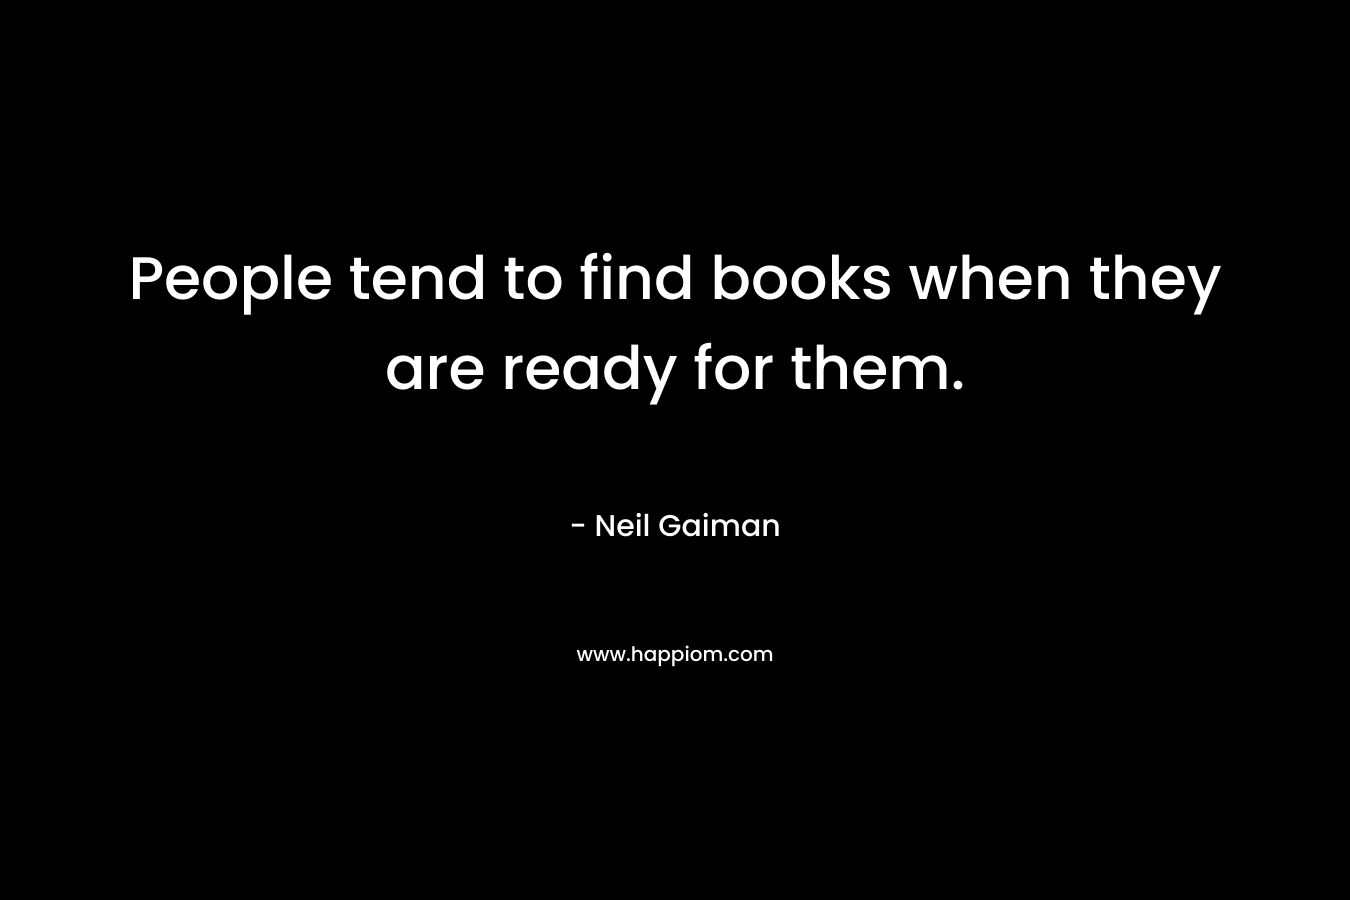 People tend to find books when they are ready for them.